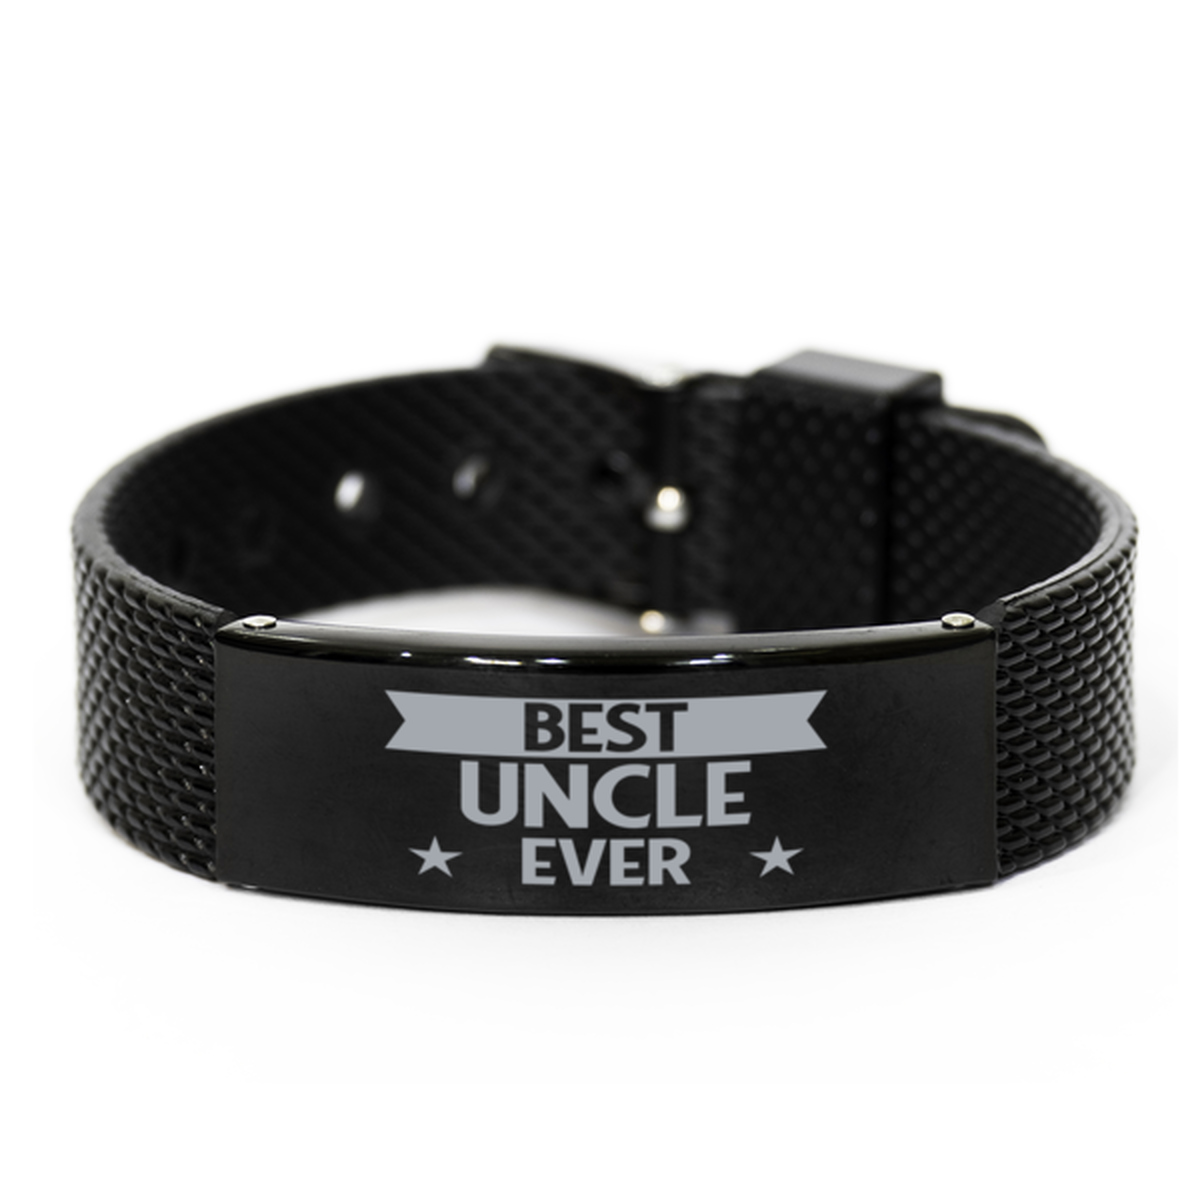 Best Uncle Ever Uncle Gifts, Gag Engraved Bracelet For Uncle, Best Family Gifts For Men